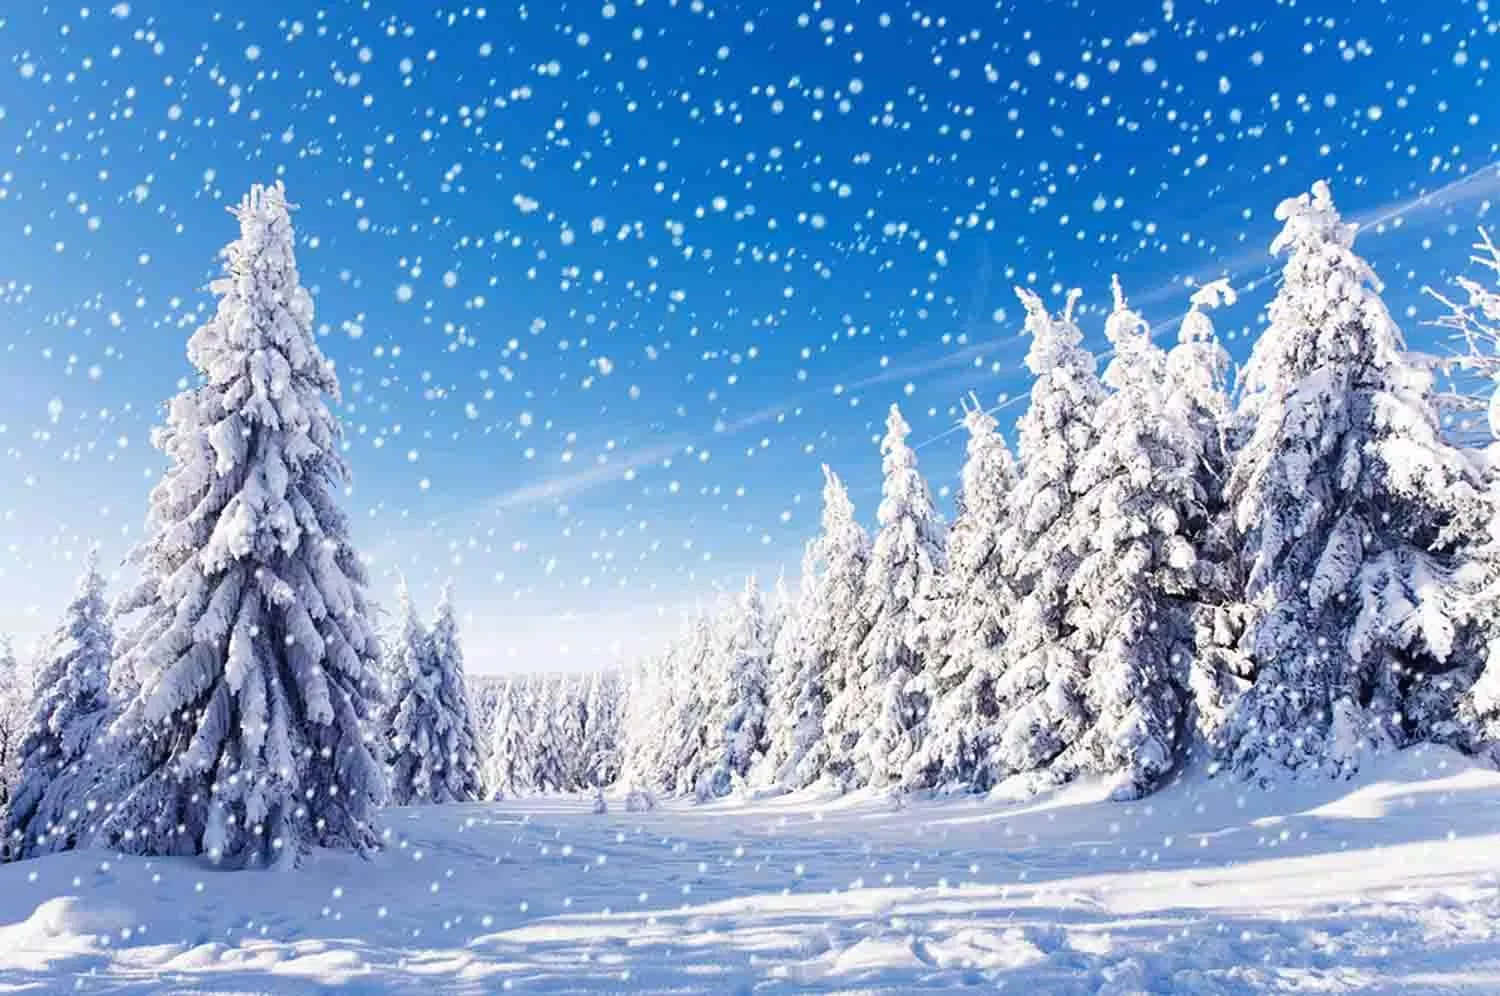 A view of a tranquil snowy landscape Wallpaper